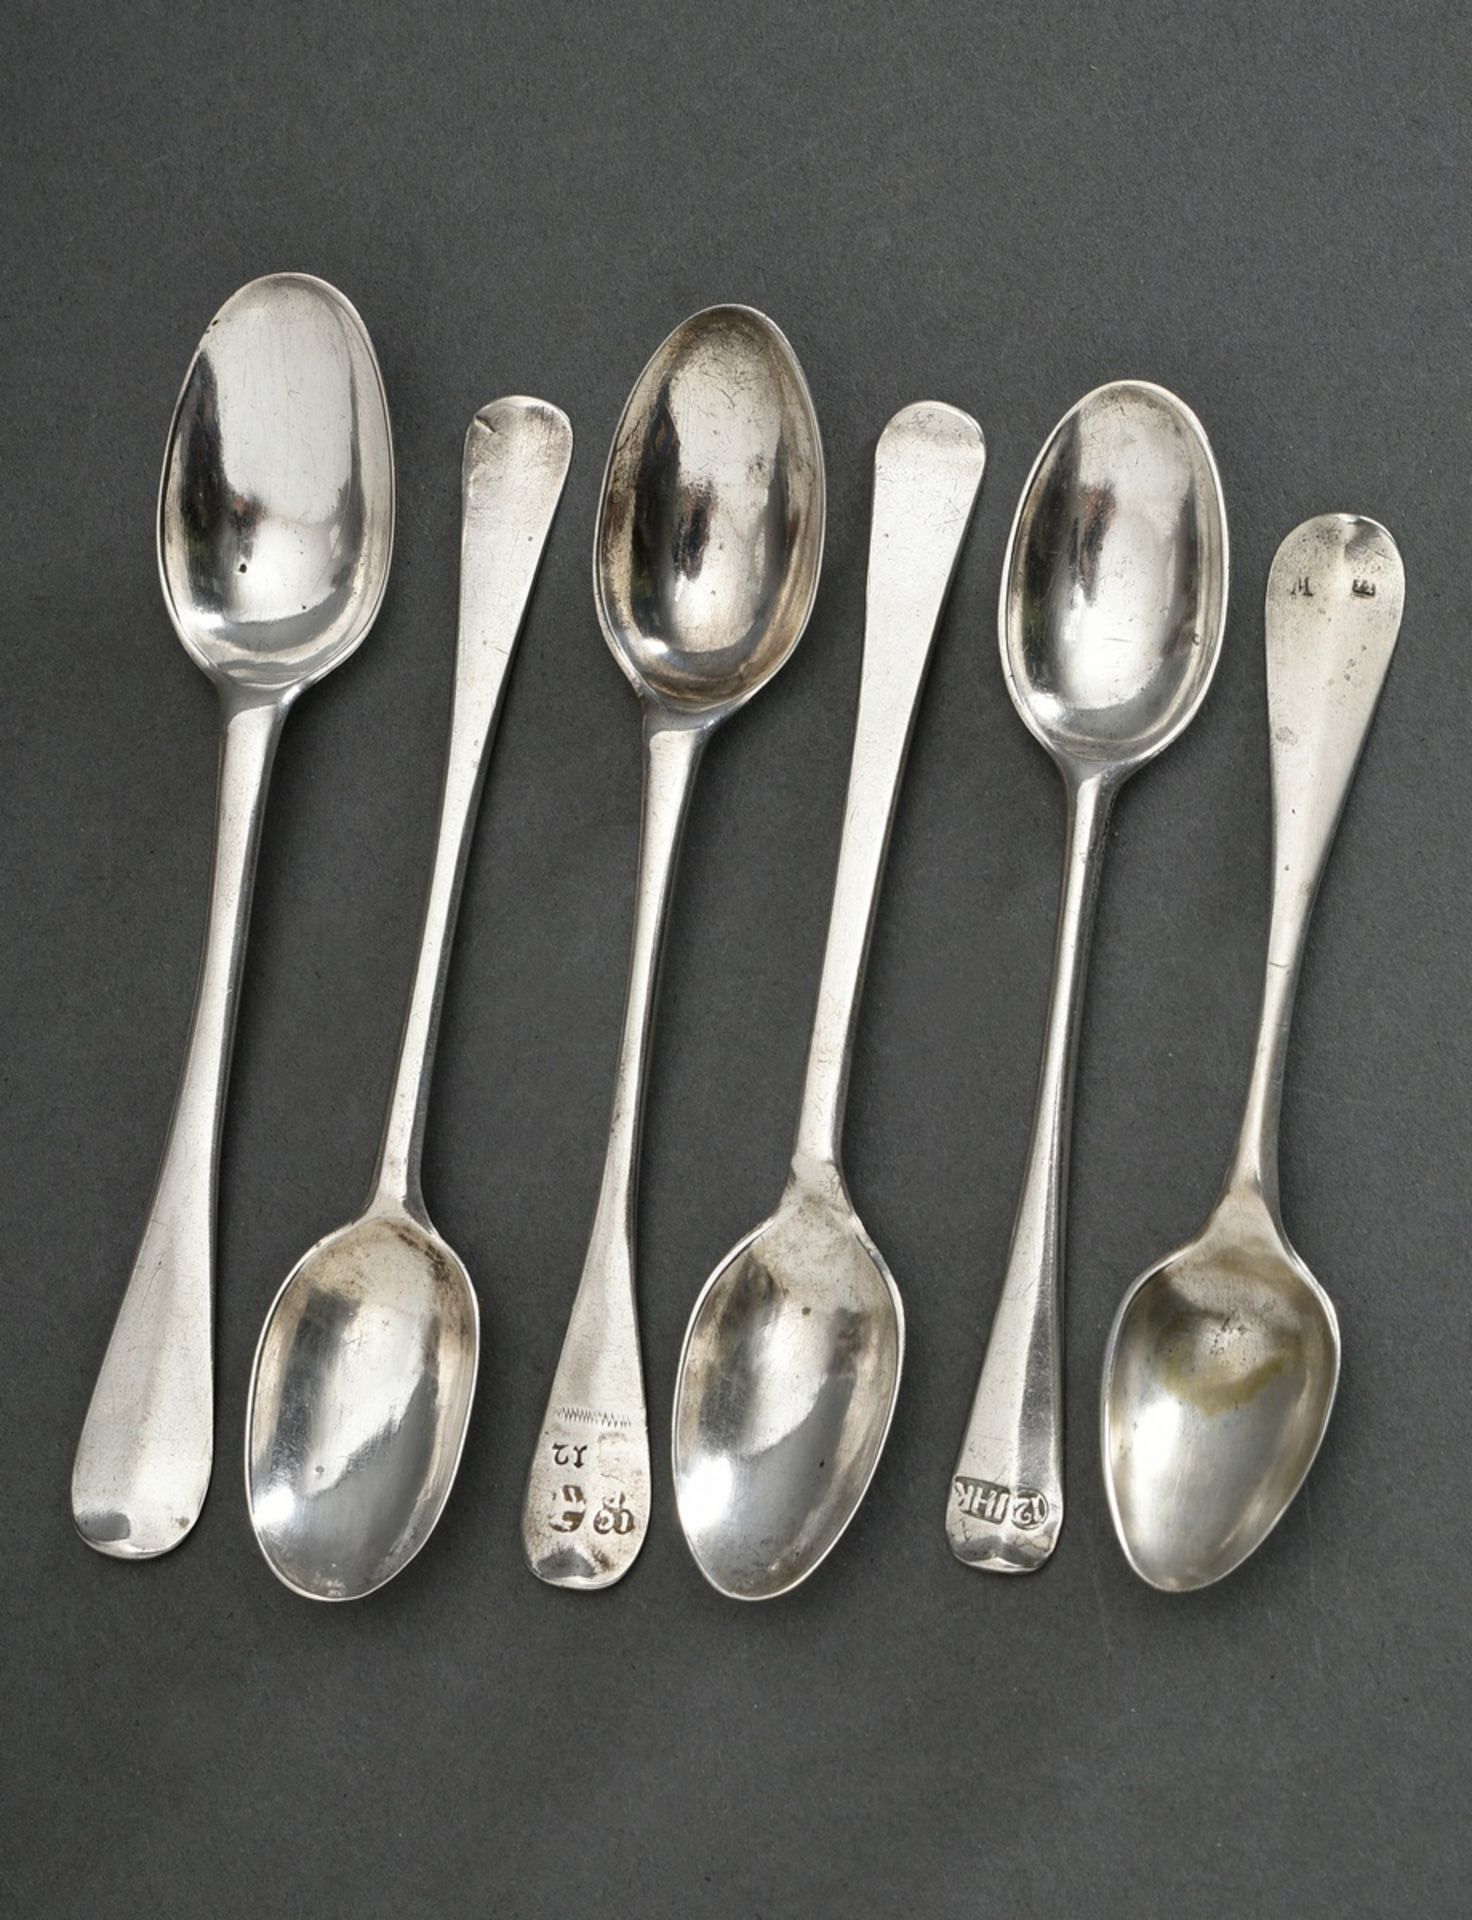 6 Various plain teaspoons after the English "Hanoverian" model, some with engraved owner's monogram - Image 2 of 4